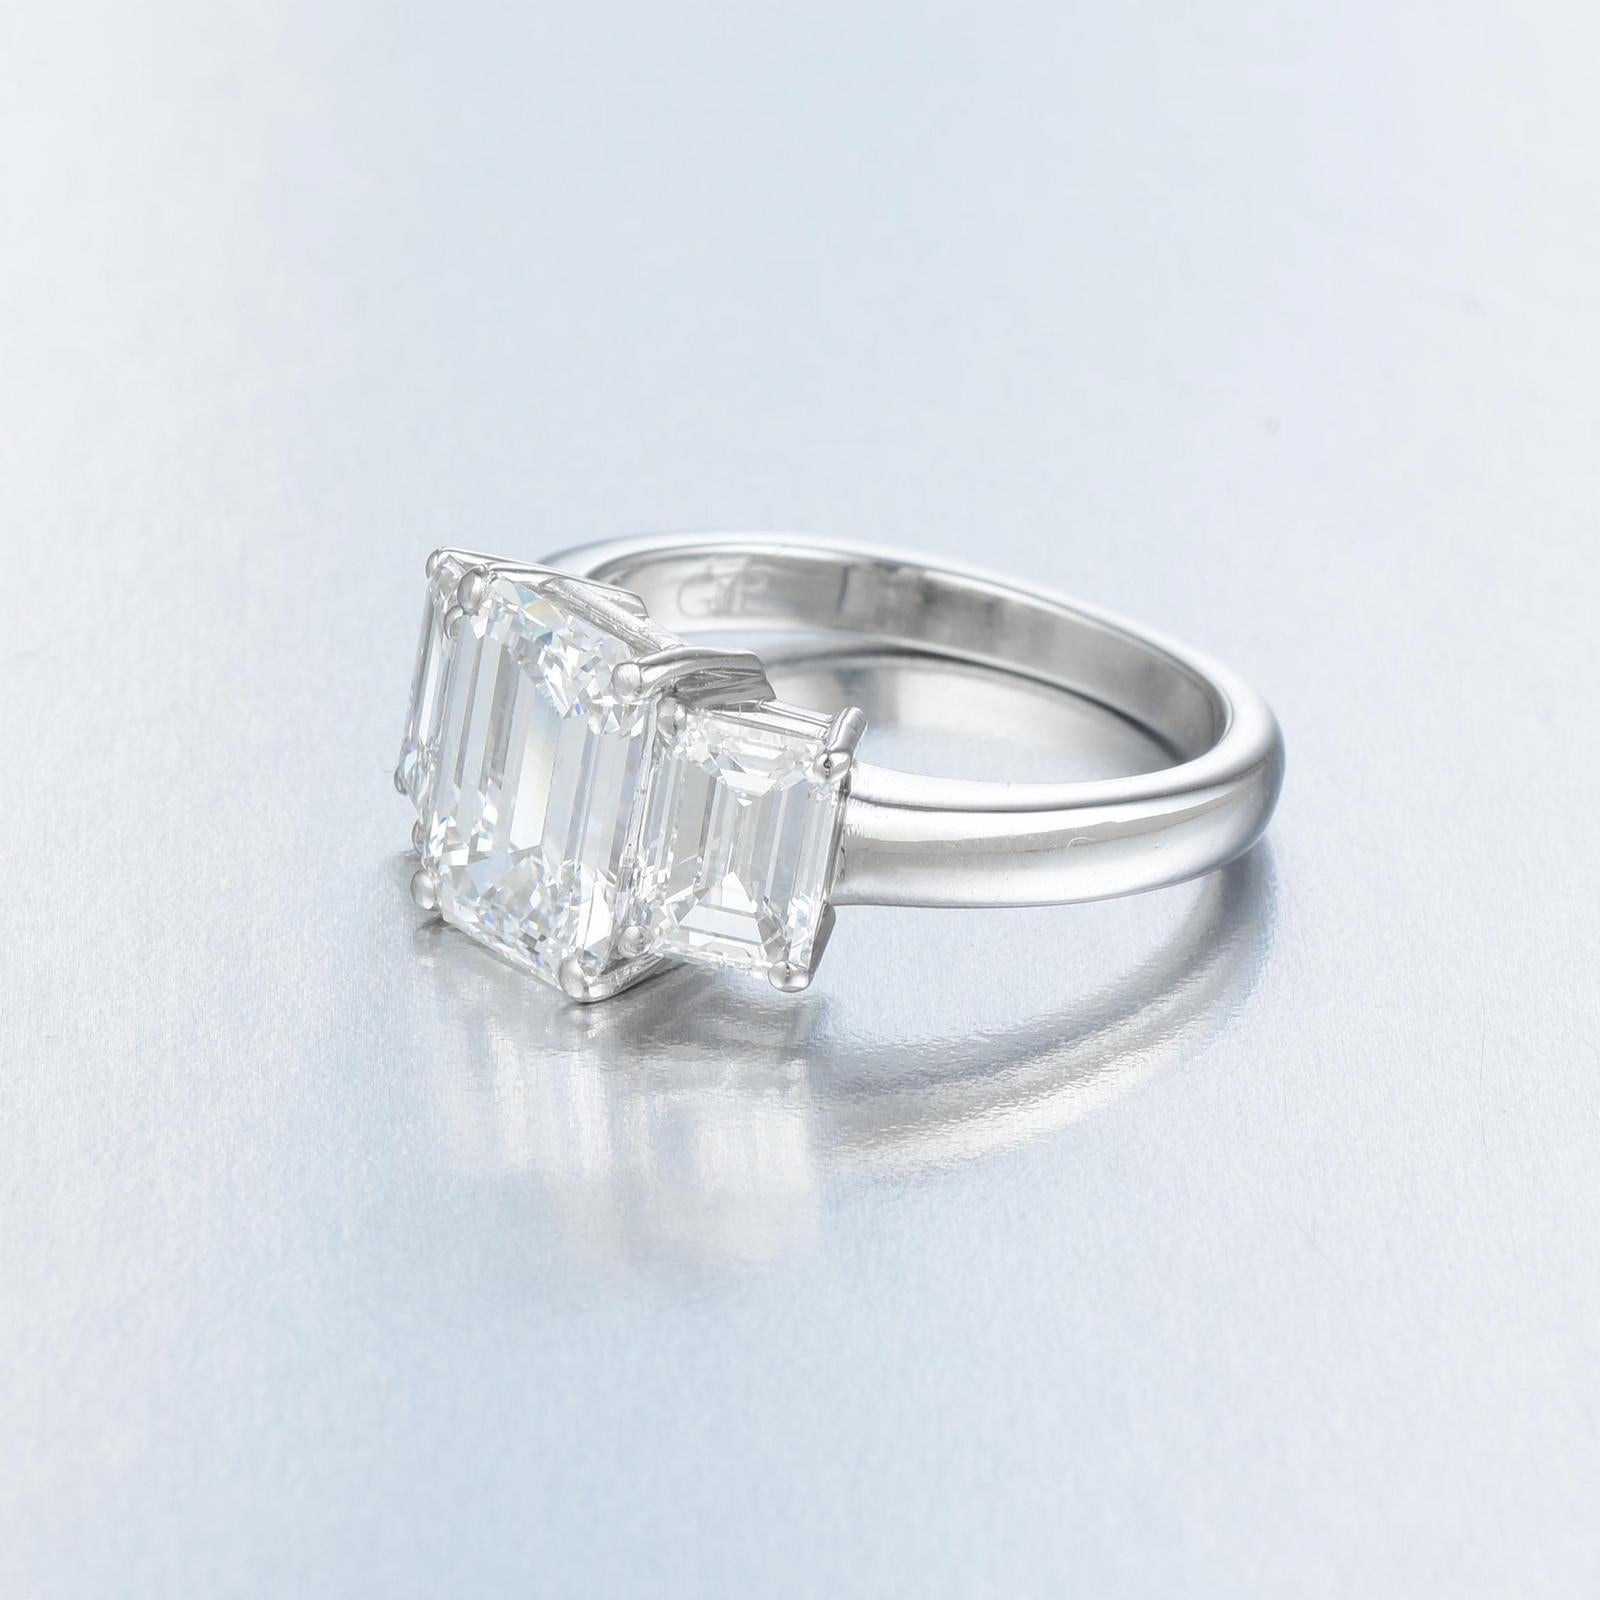 The main stone is an amazing quality Gia Certified 4 Carat Emerald Cut Diamond G Color FLAWLESS Clarity

plus 0.80 carats of both side emerald cut diamonds